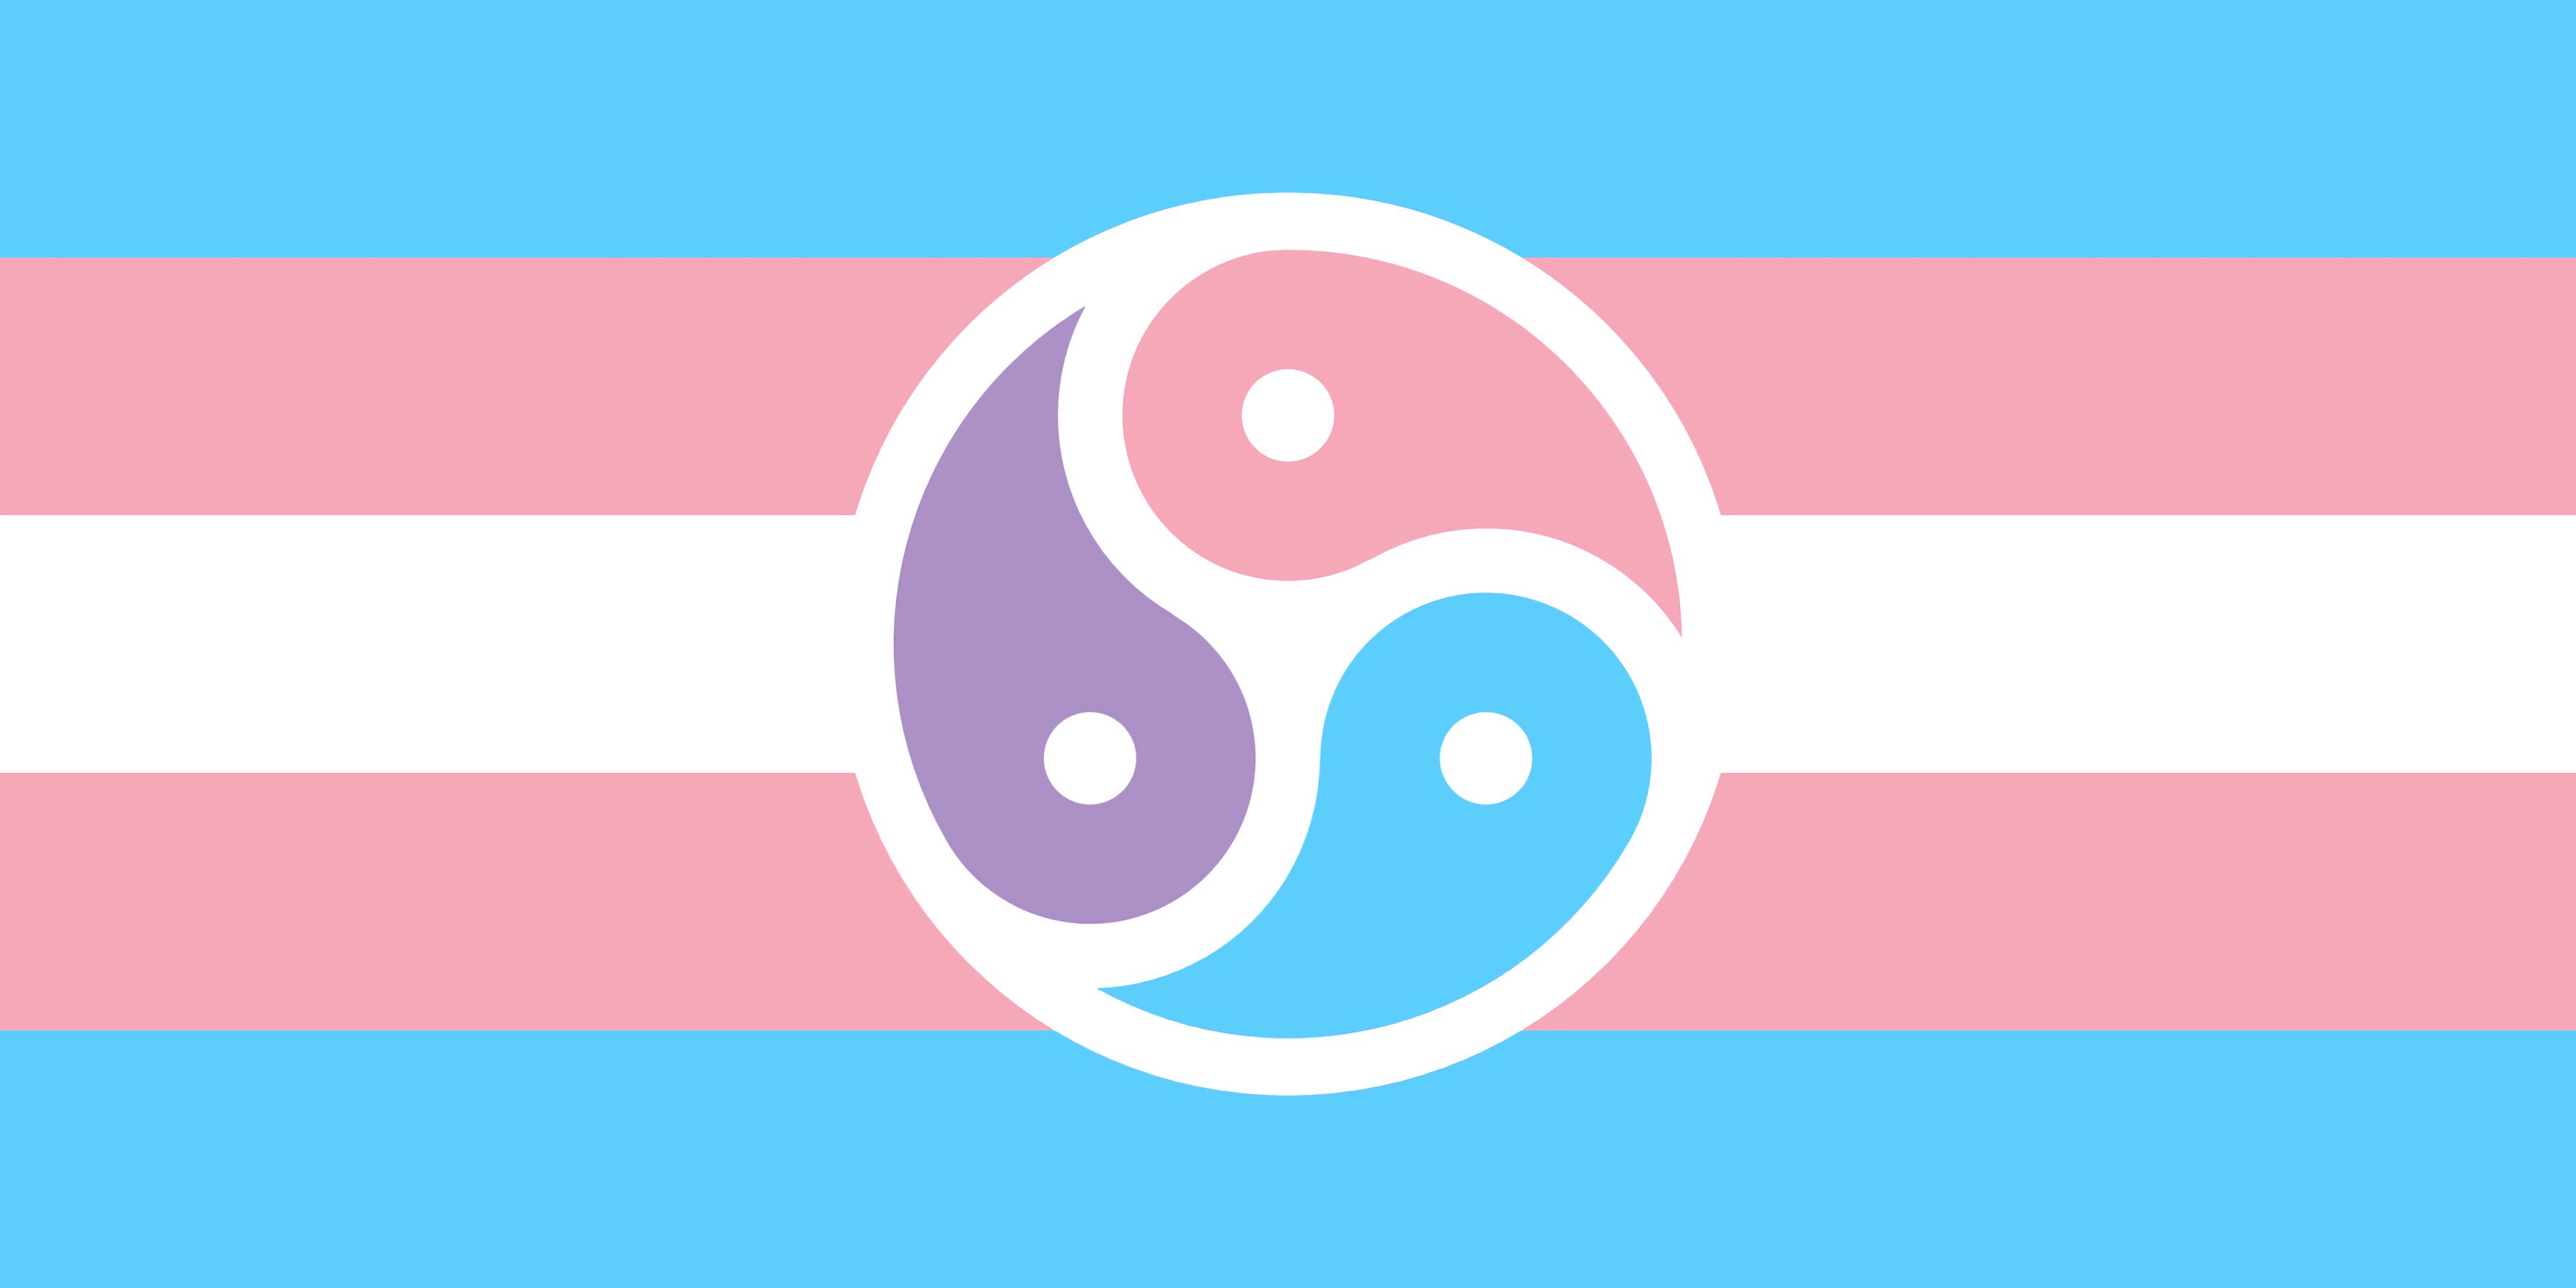 MORNING rainbow LGBT pride flag lipstick lesbian agender demisexual aromantic asexual gay straight transgender flag. Flags, Banners & Accessories